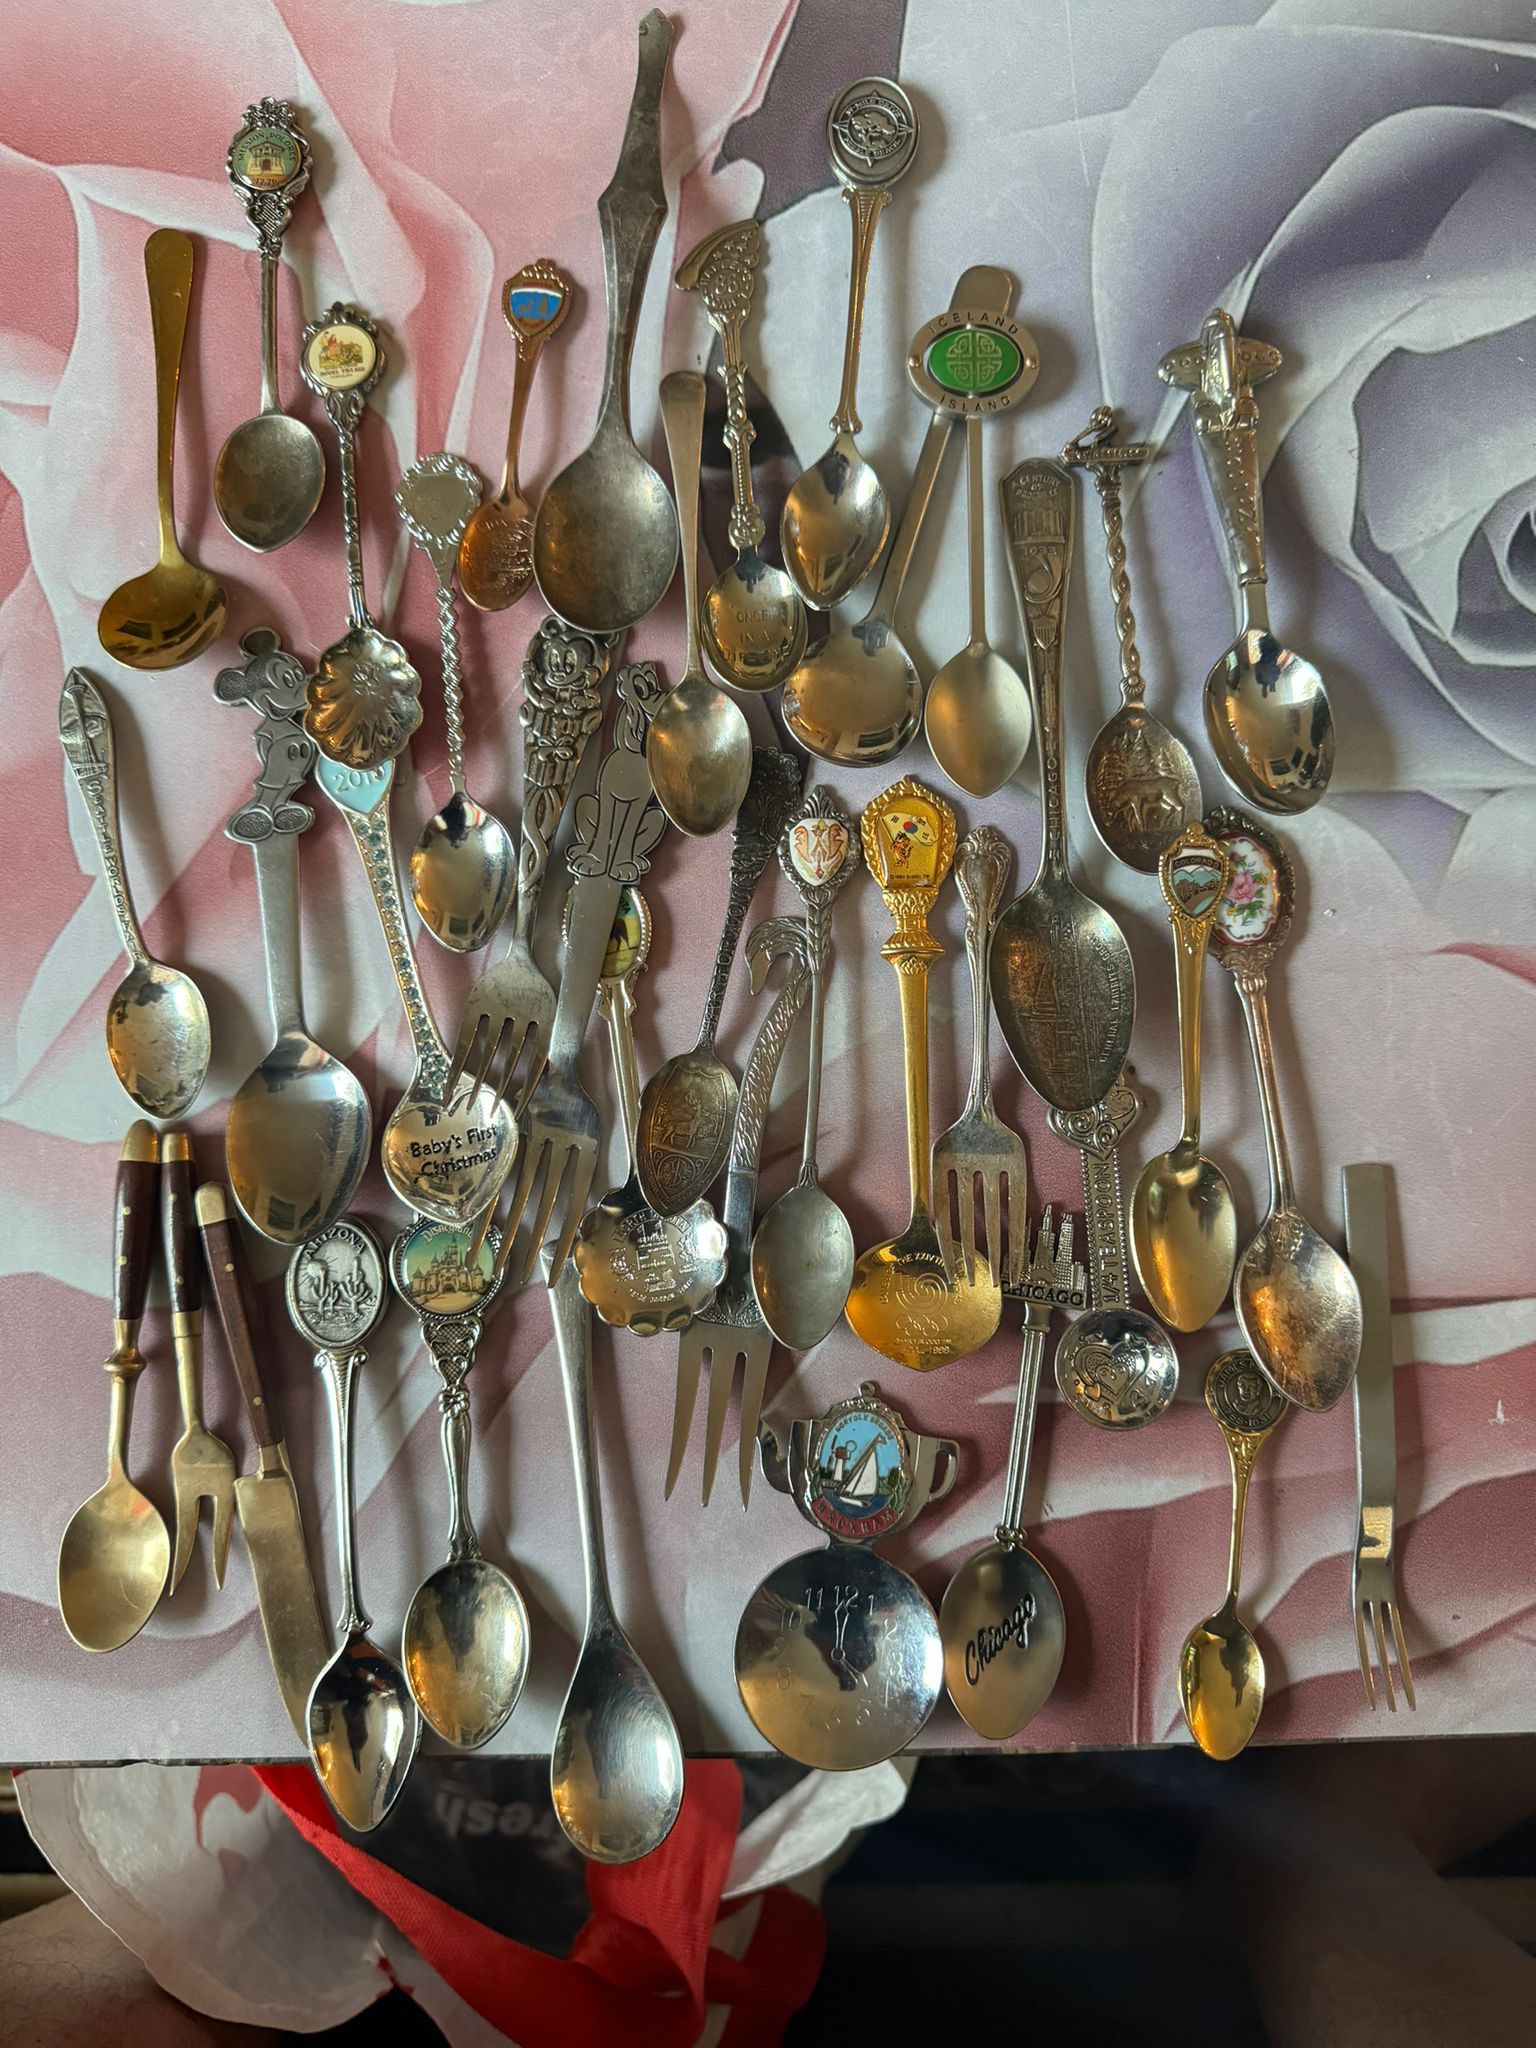 Small Antique Spoons